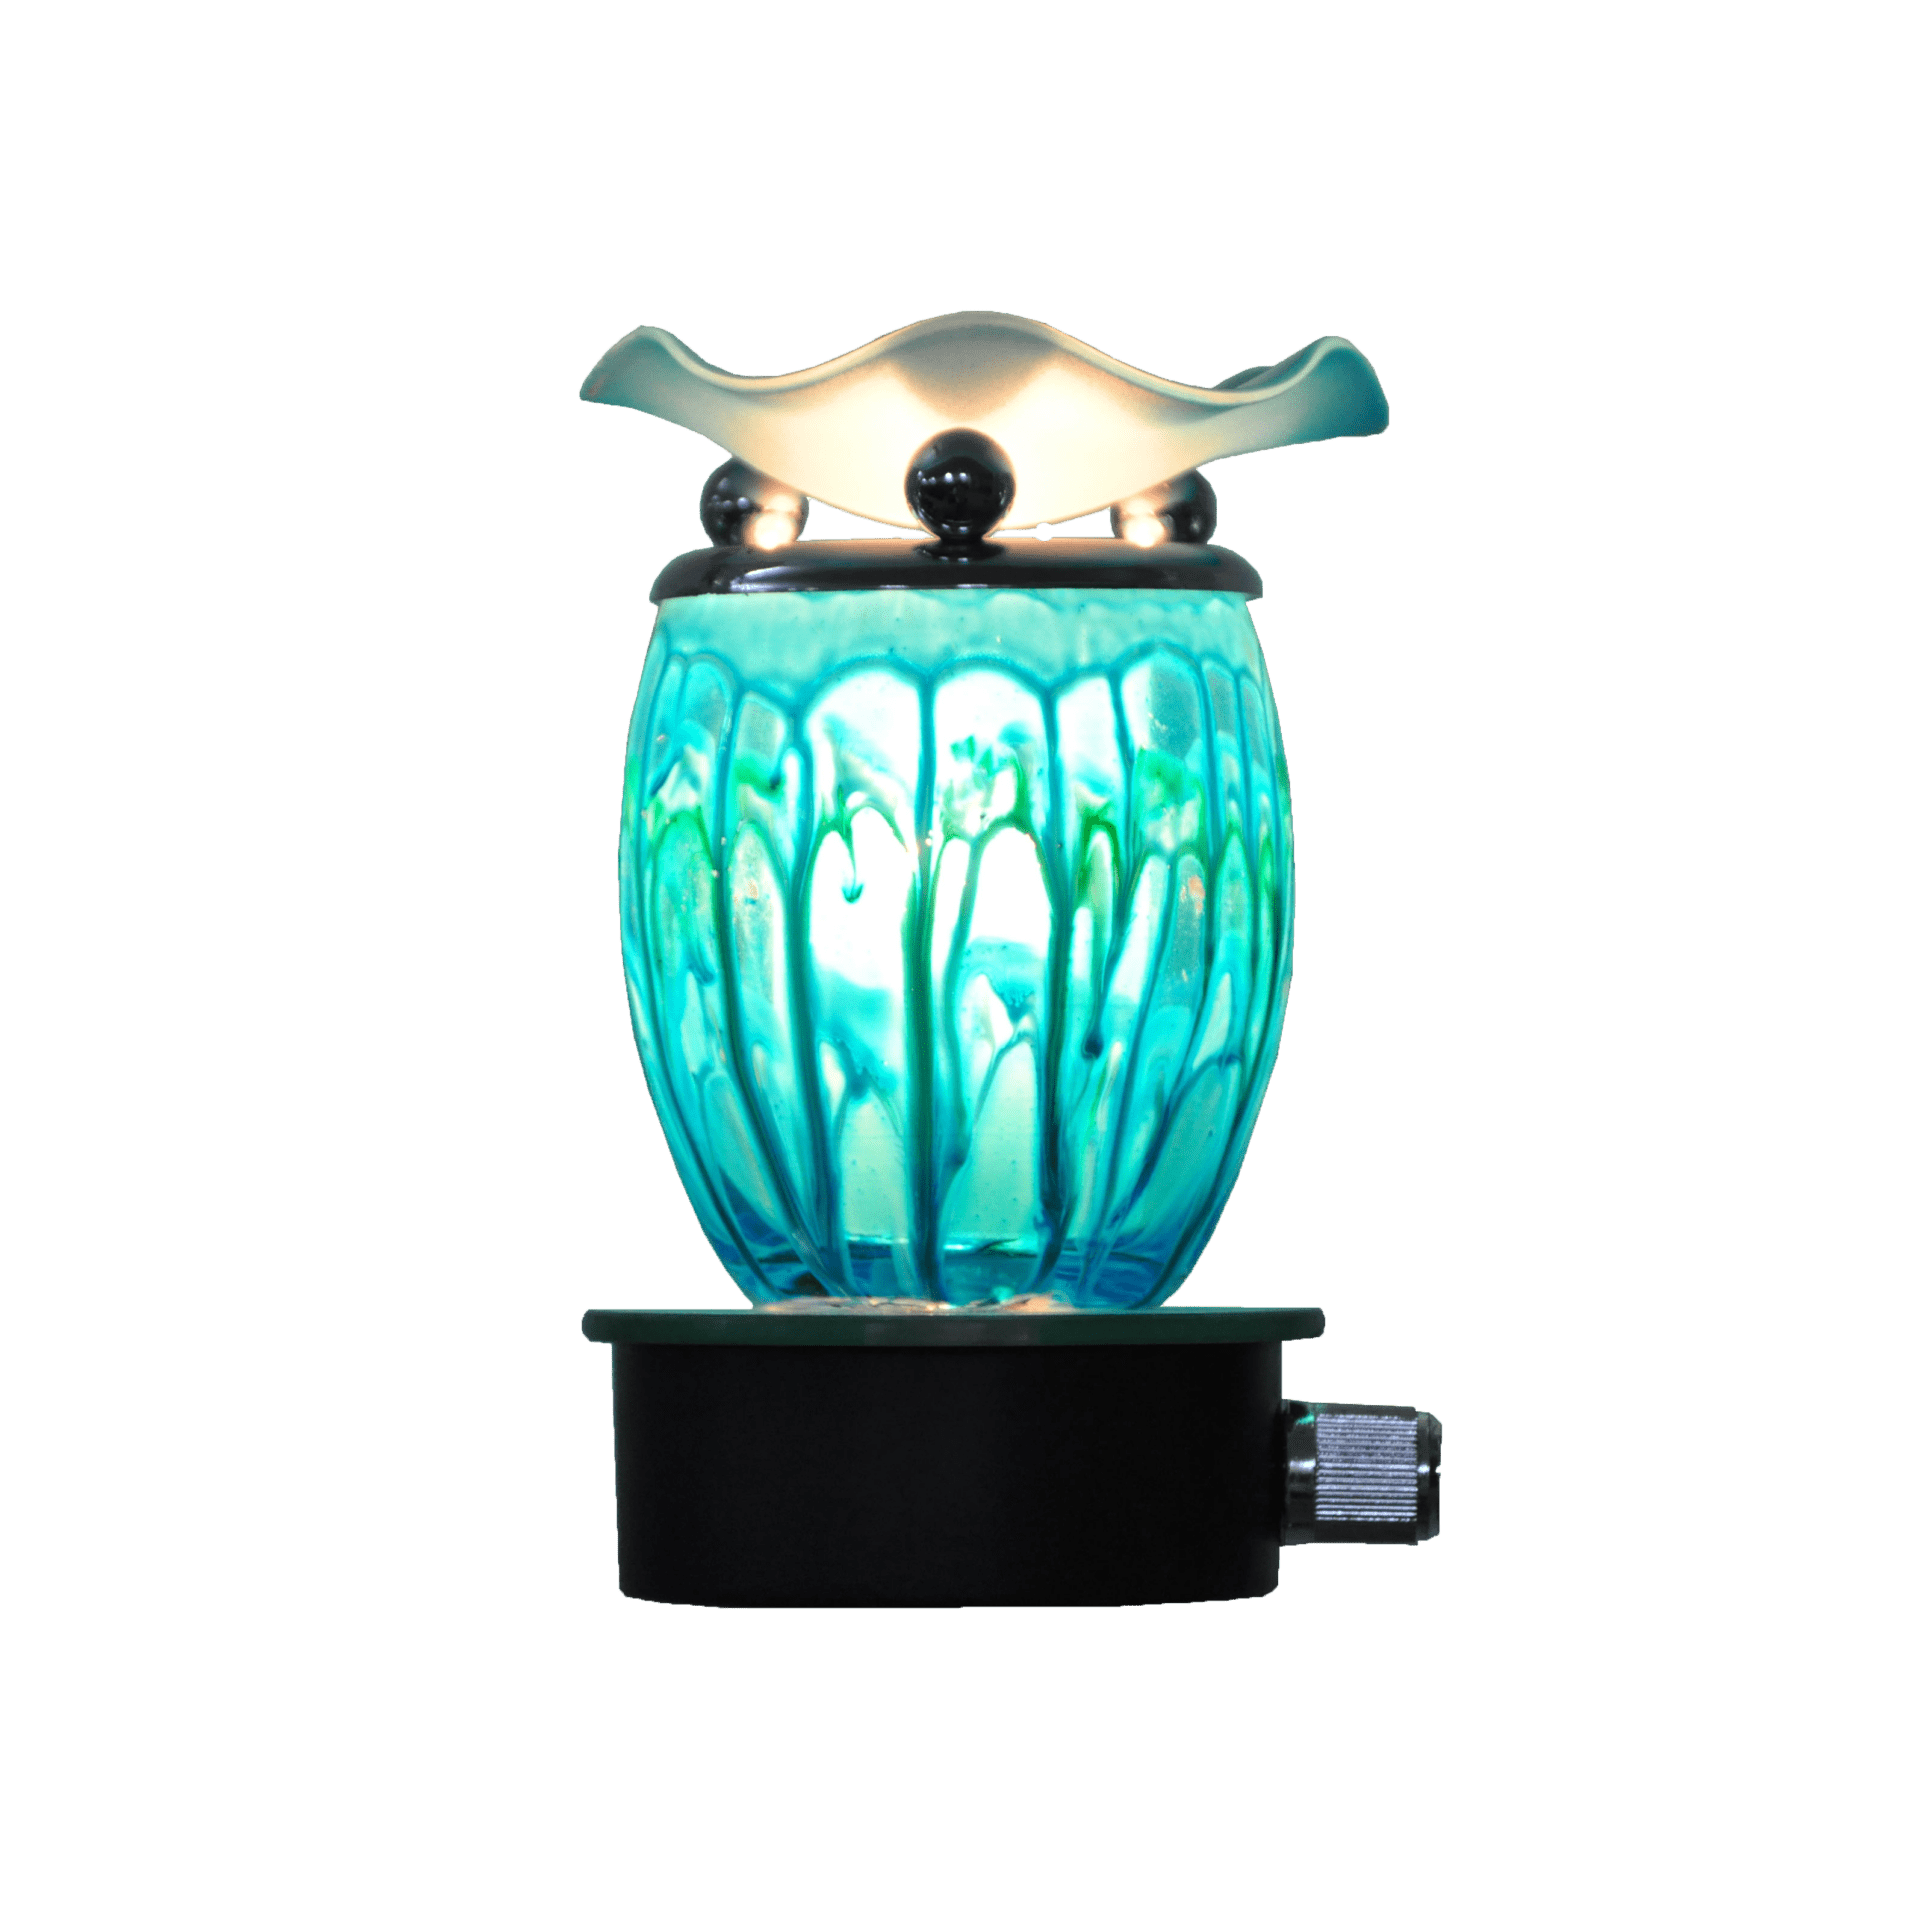 Coo Candles Electric Candle Wax Melt Warmer or Oil Burner Lamp